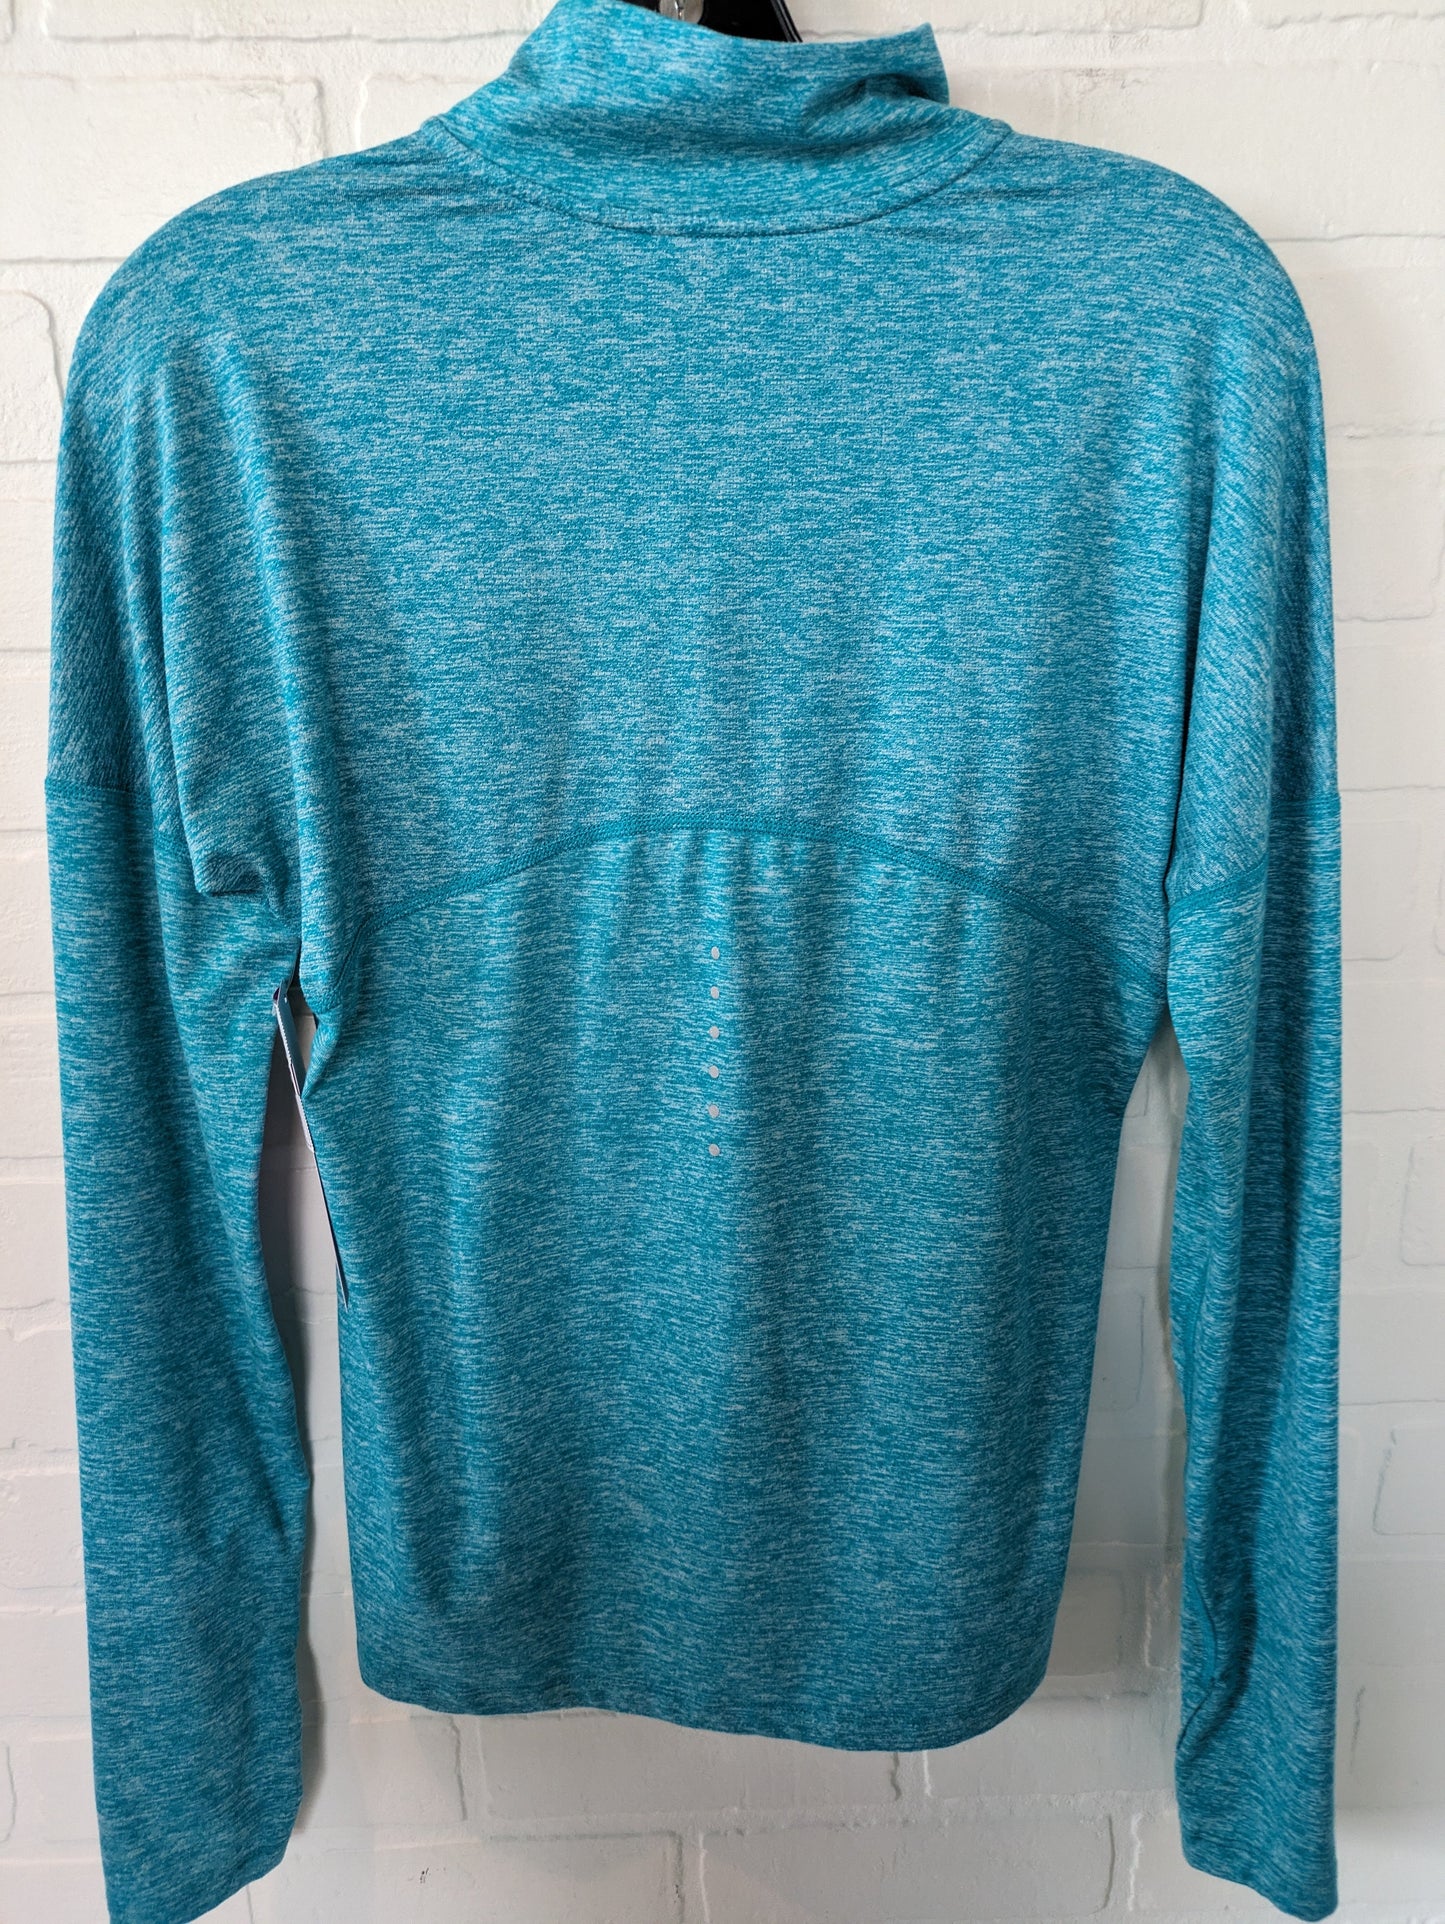 Blue Athletic Top Long Sleeve Collar Nike, Size Xs